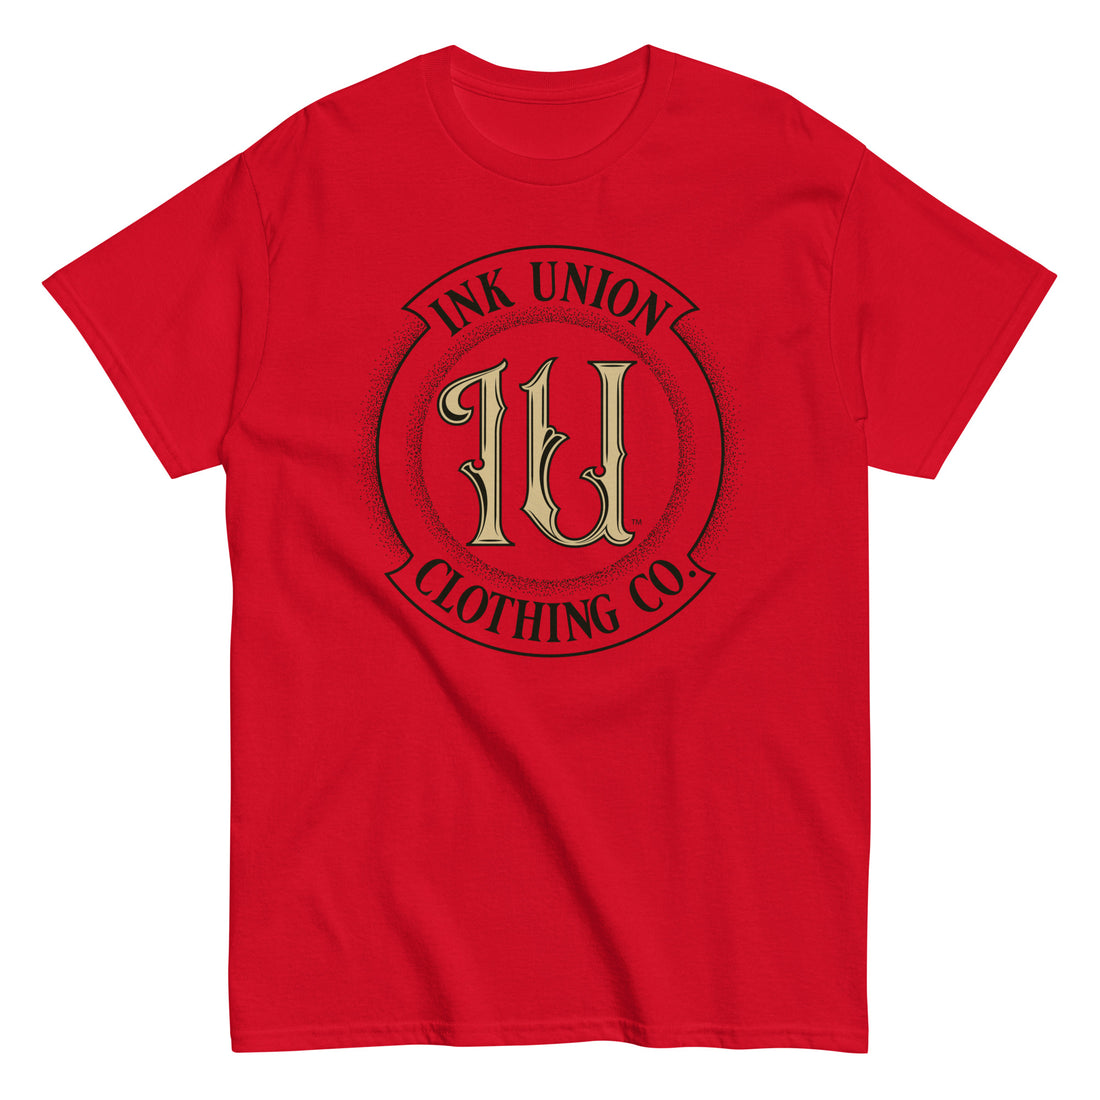 A  red t-shirt with the Ink Union Clothing Co Badge logo in black and gold centered on the front of the shirt.